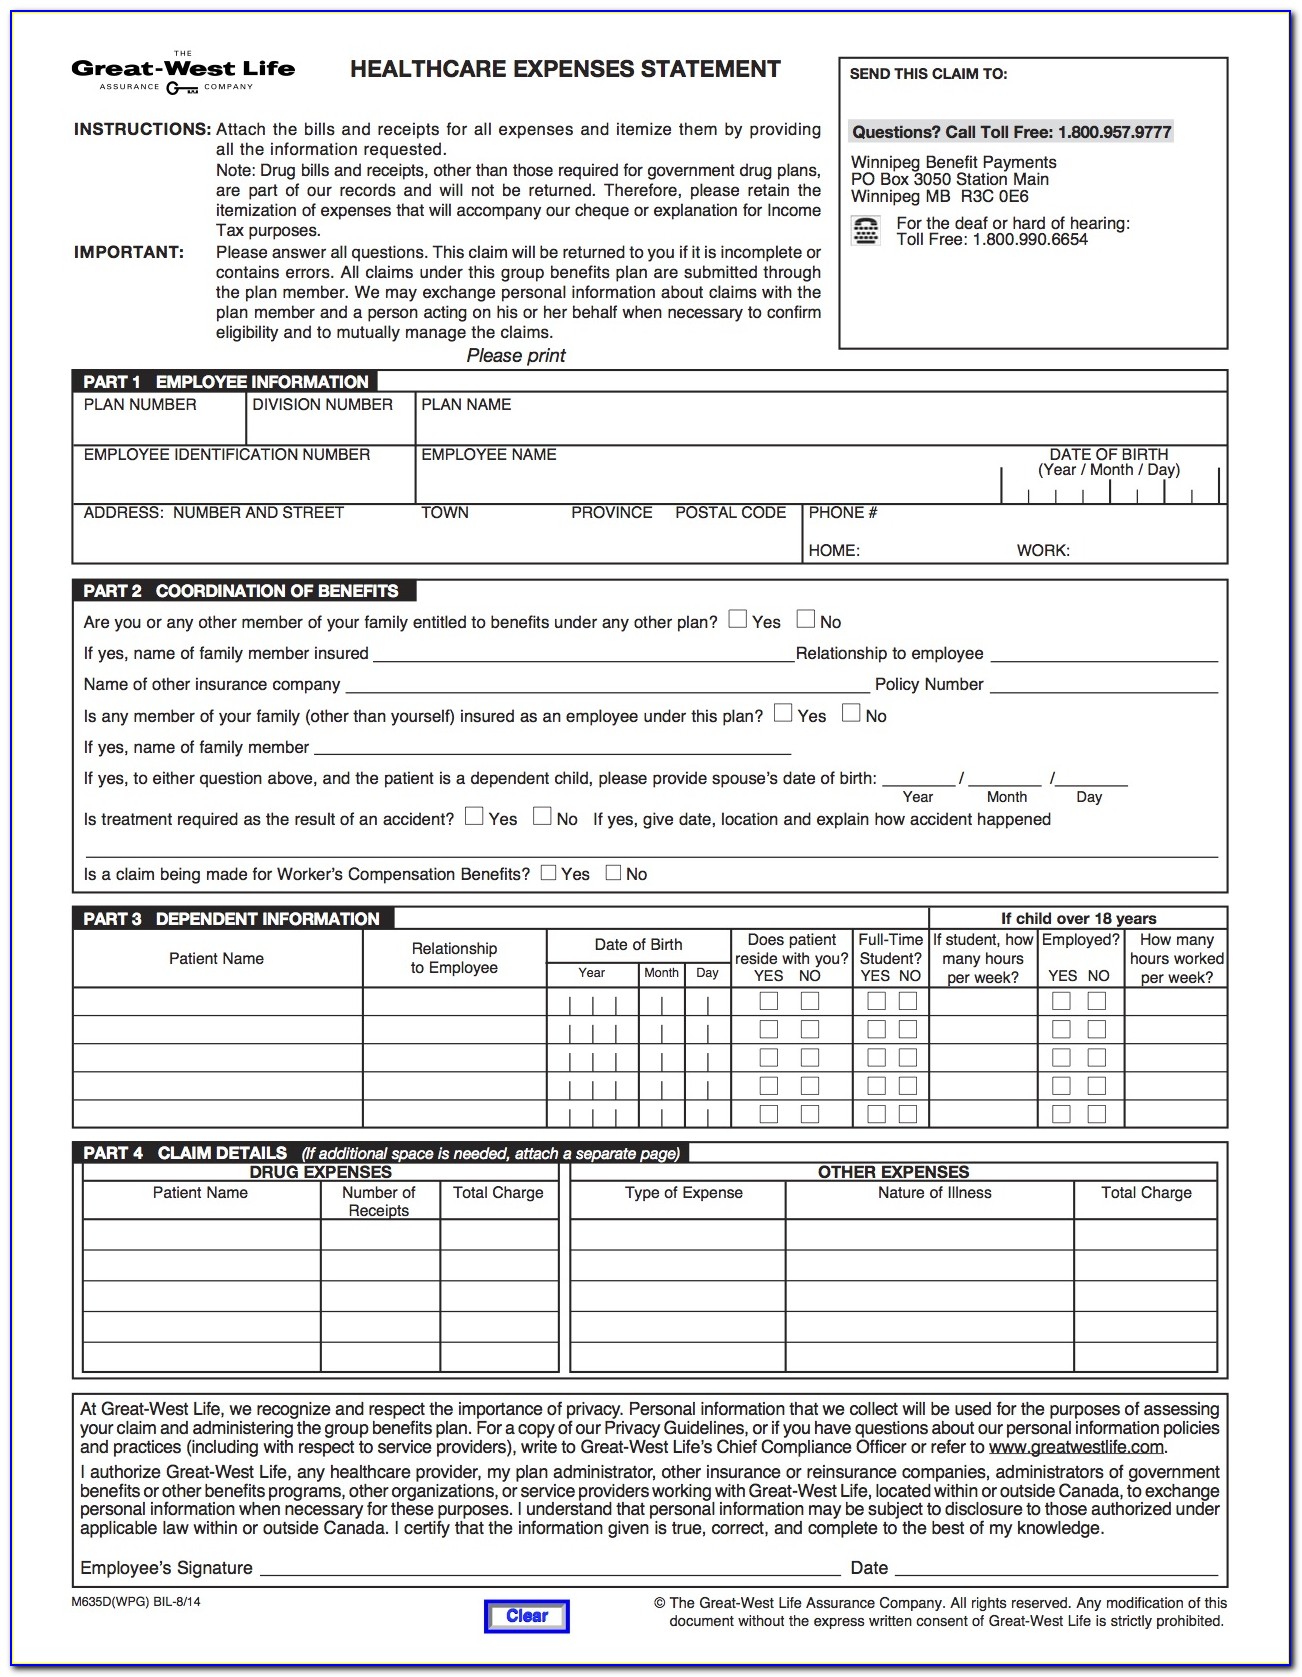 Pacific Blue Cross Extended Health Care Standard Form